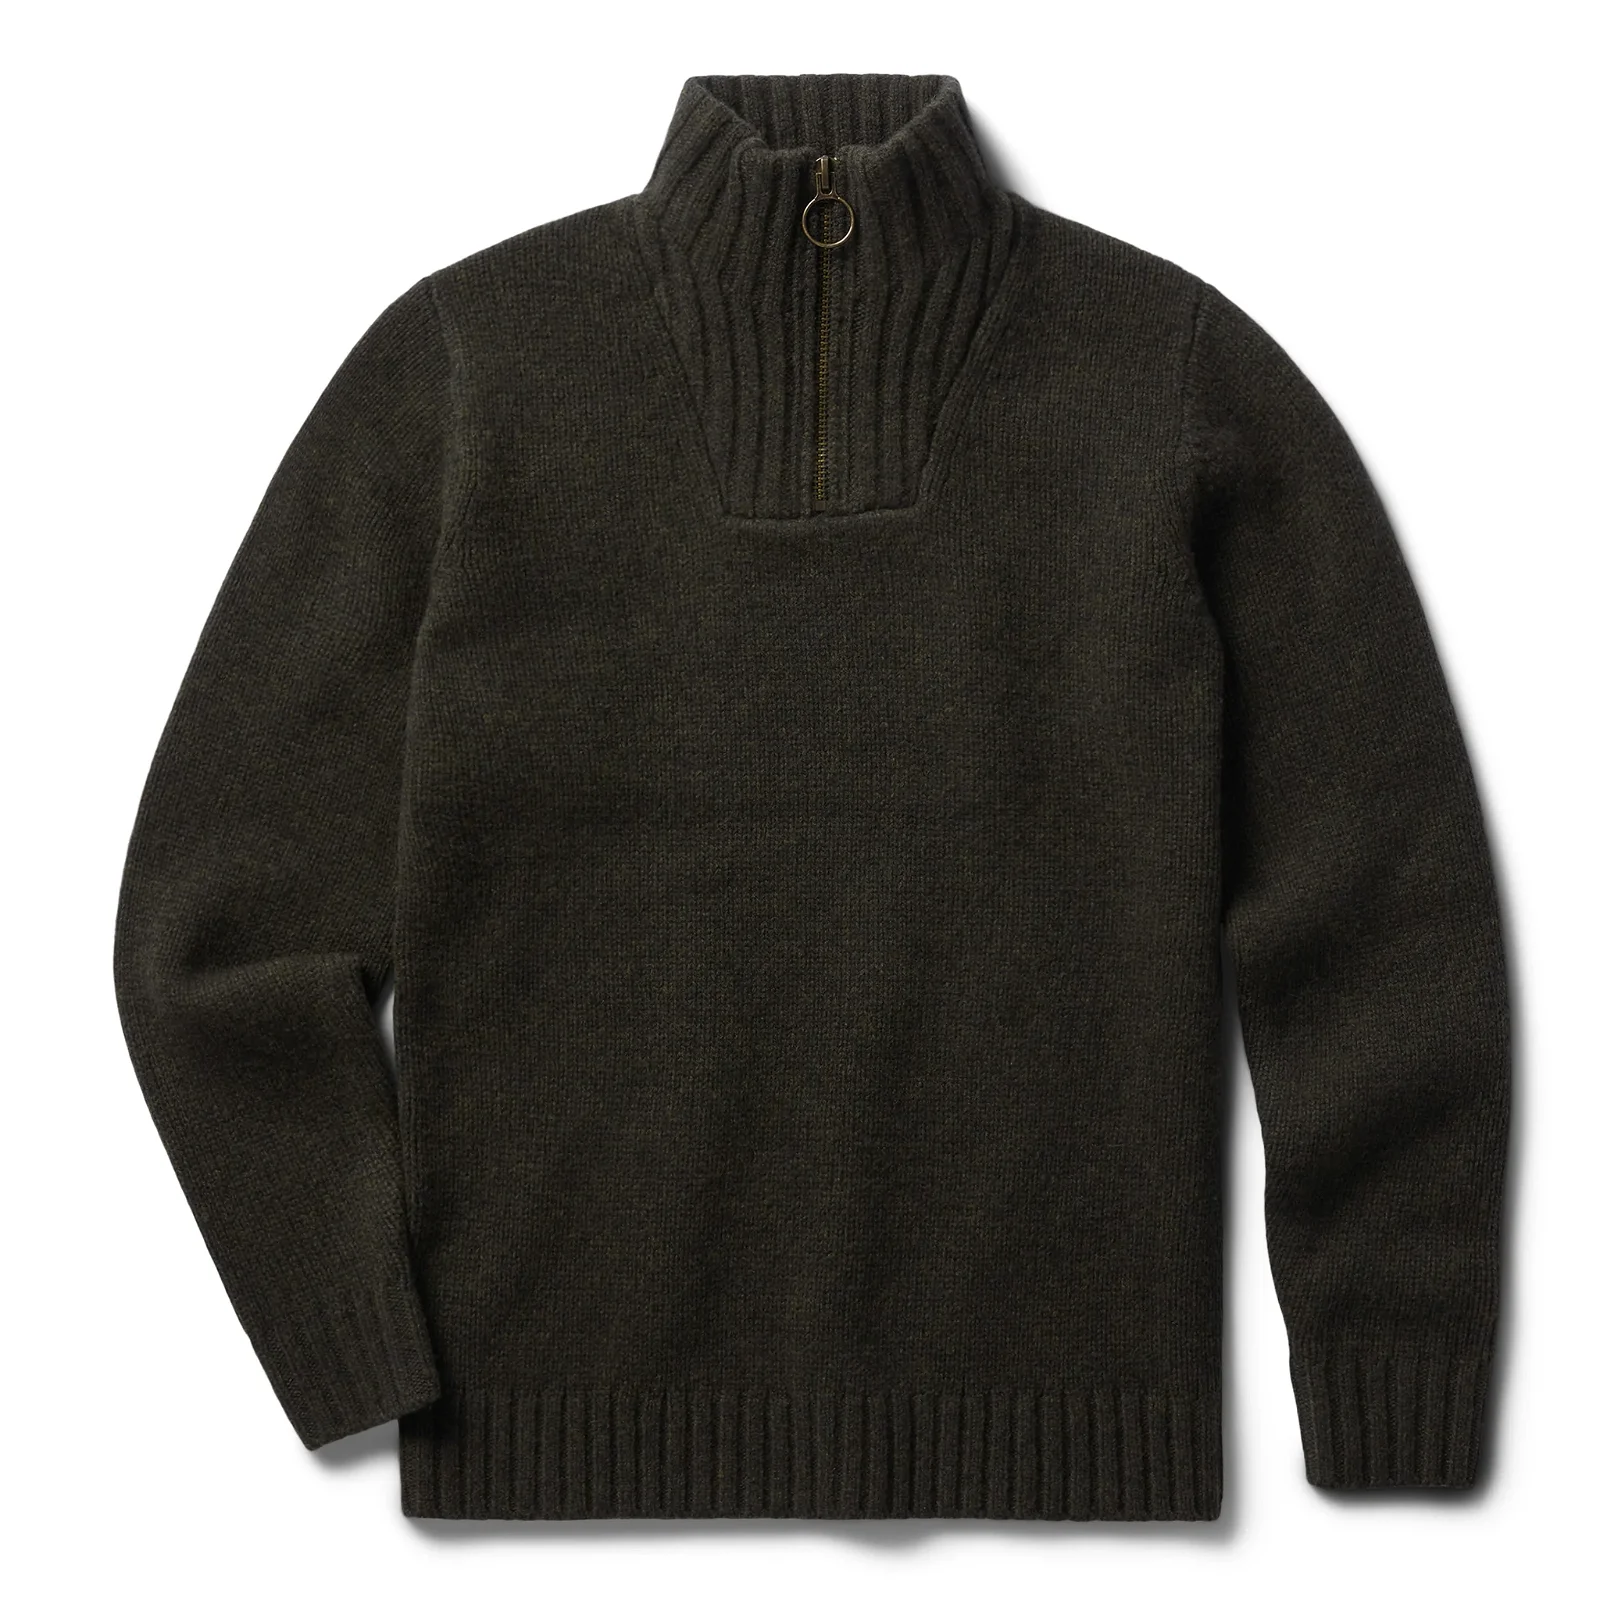 Image of The Quarter Zip Tanker Sweater in Loden